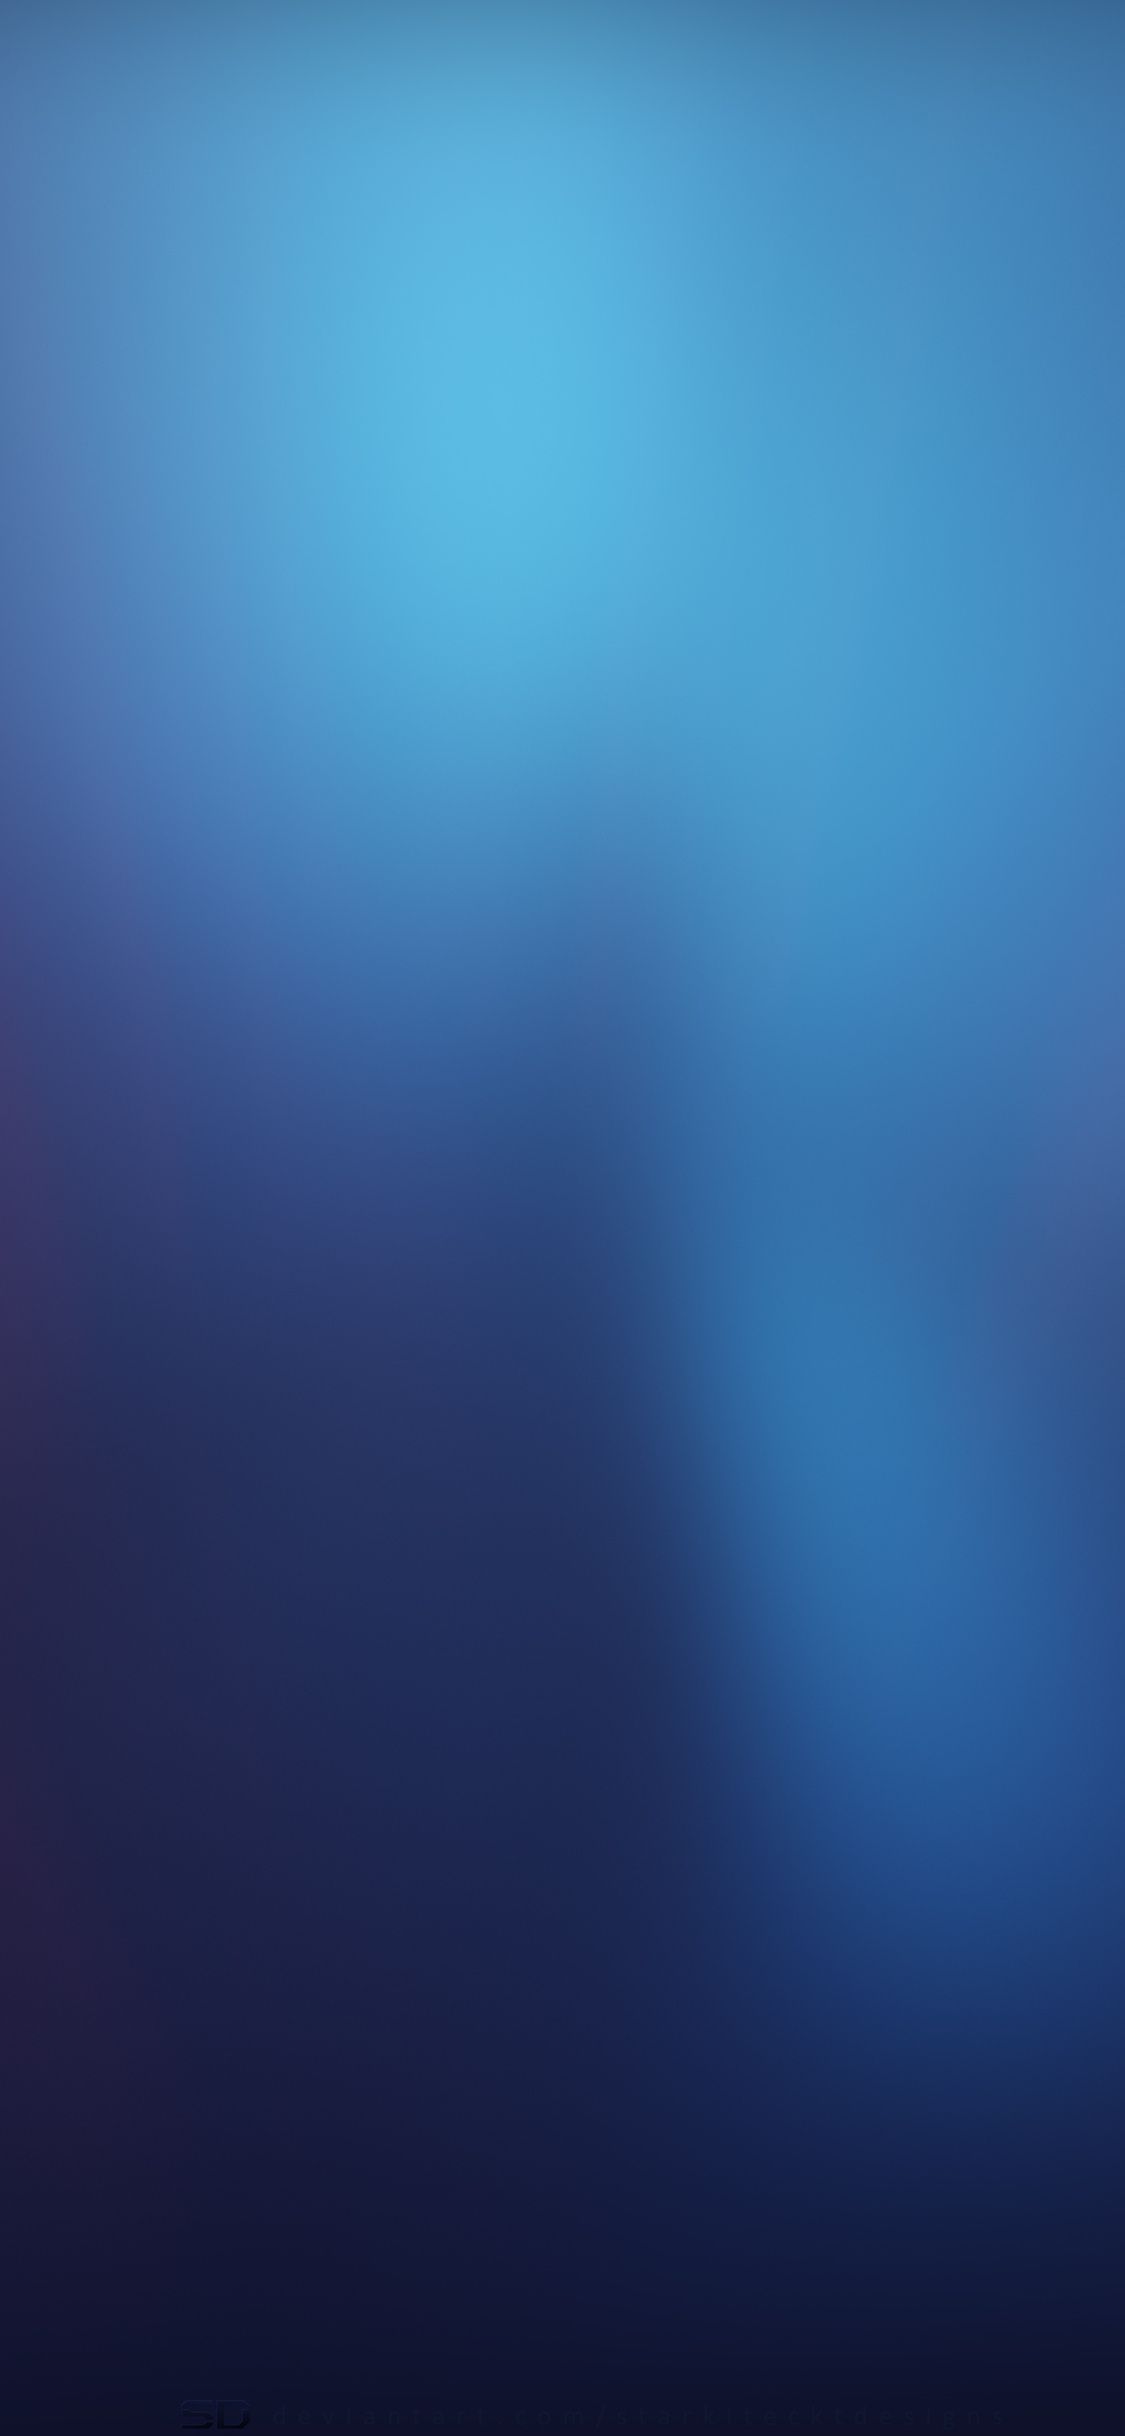 1125x2436 Abstract Minimal Blur 5k Iphone XS,Iphone 10,Iphone X HD 4k Wallpapers, Image, Backgrounds, Photos and Pictures